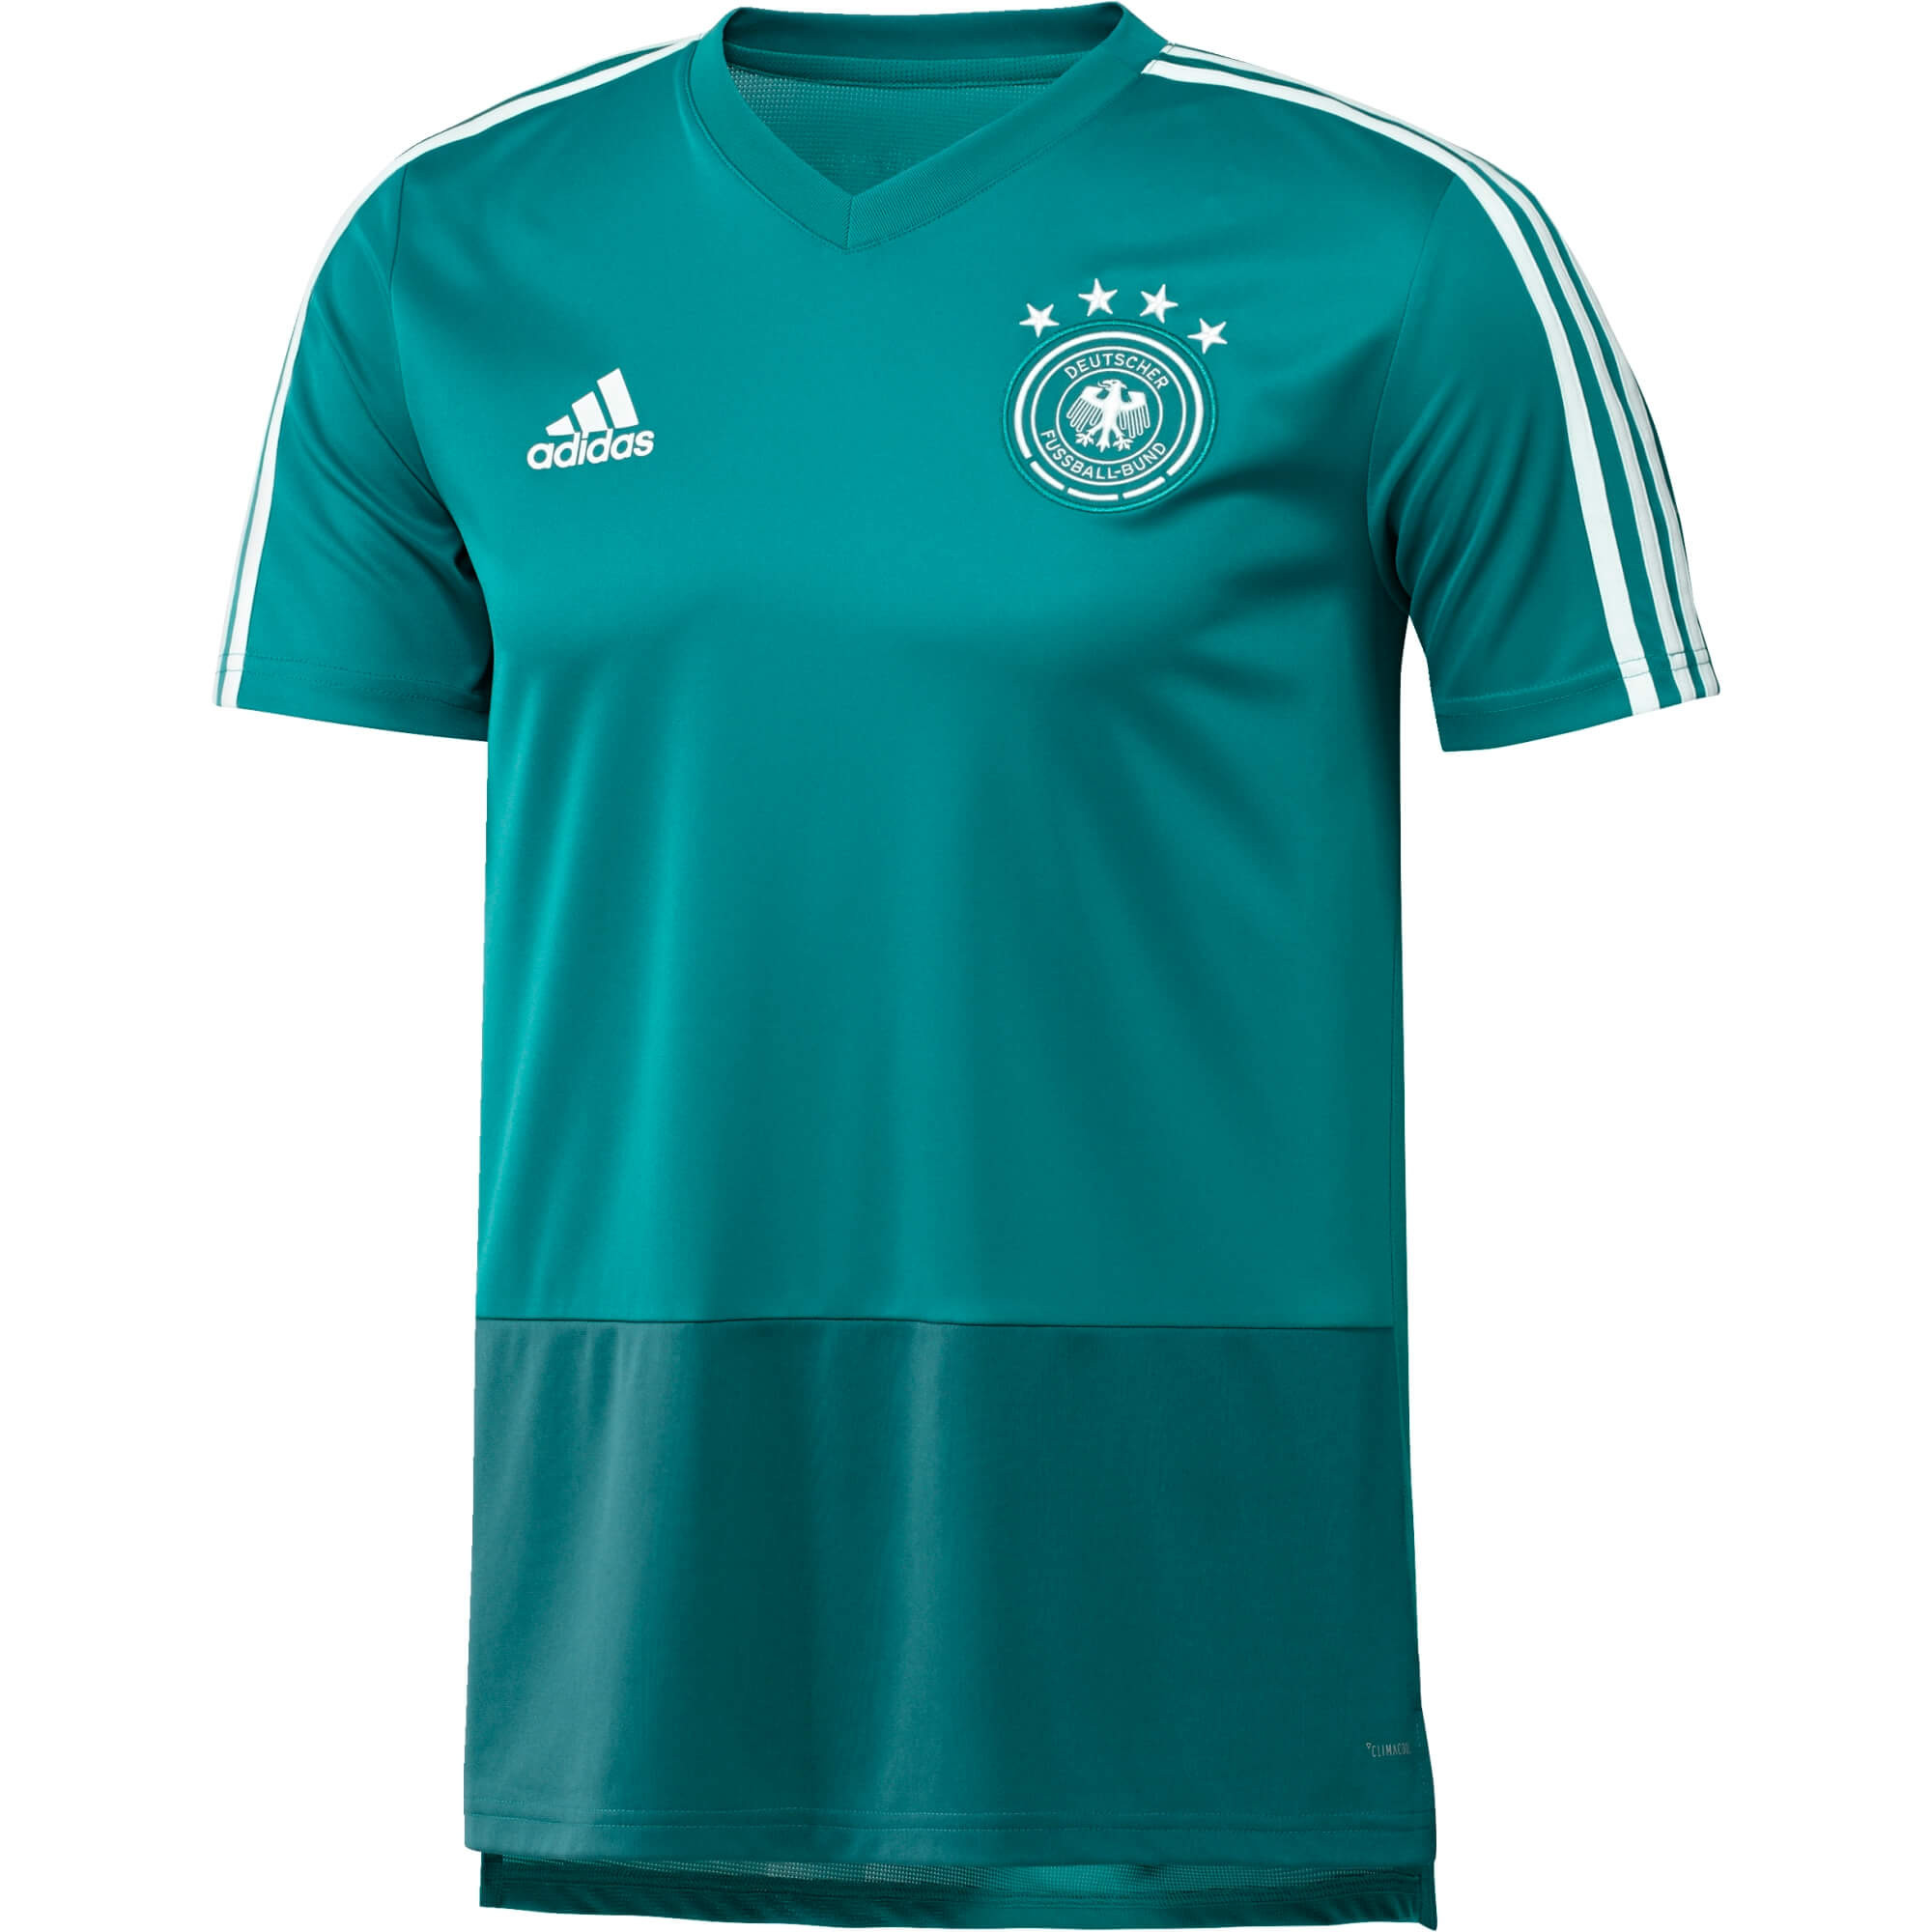 ADIDAS ALLEMAGNE TRG JSY TURQUOISE 2018